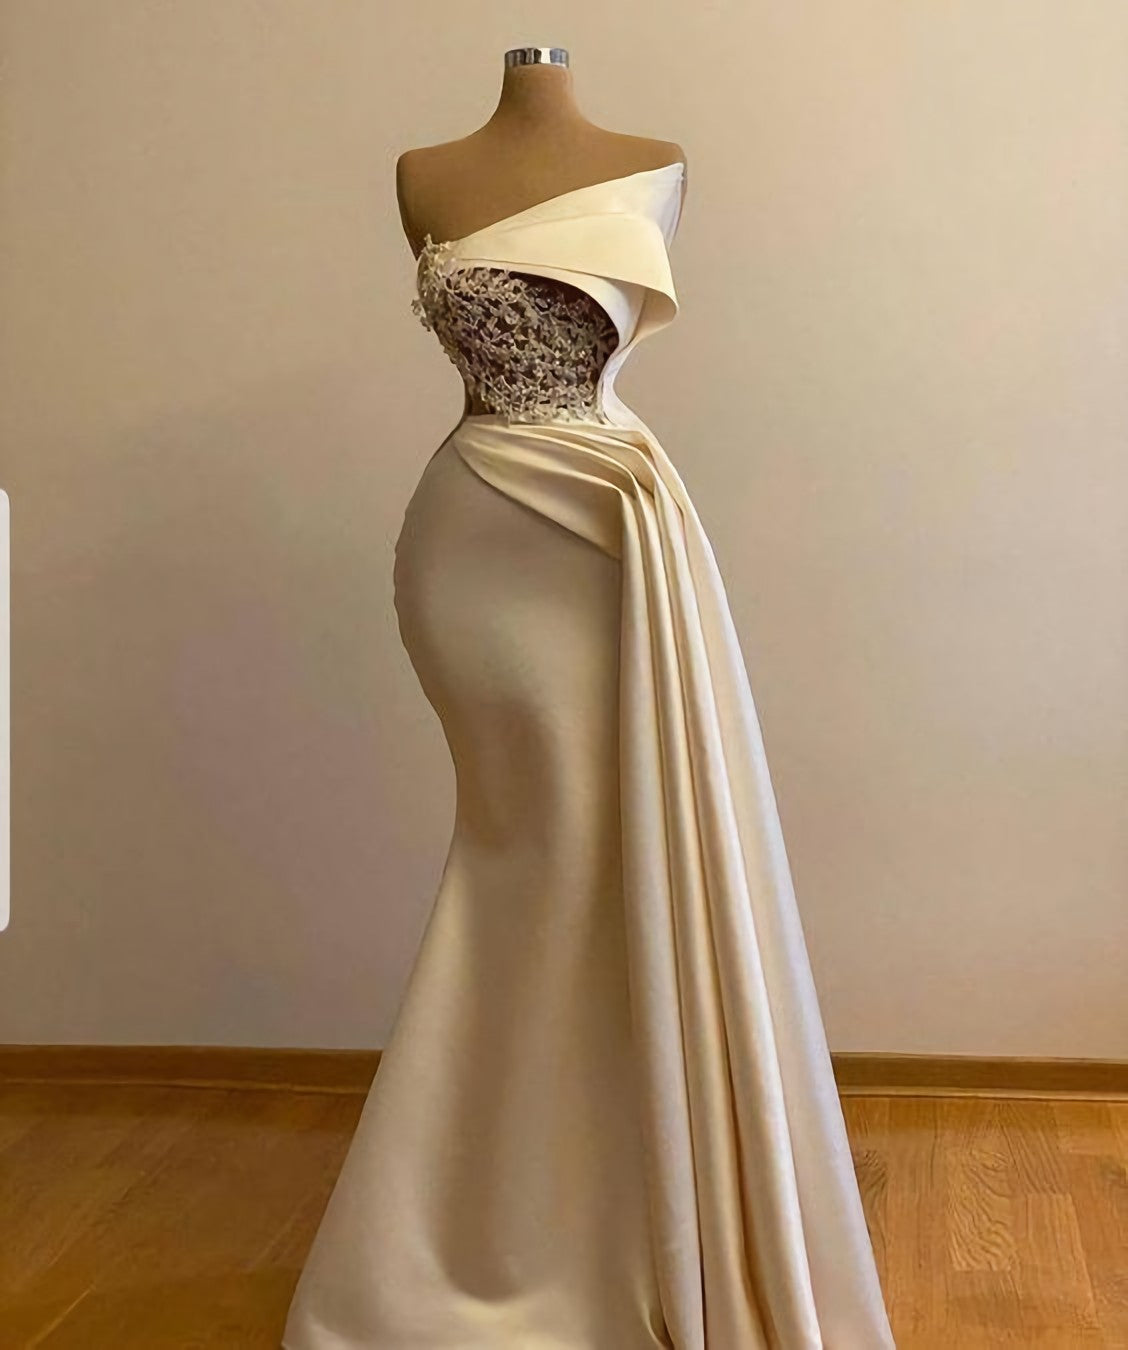 Wedding Dresses Price, Off Shoulder Ivory Prom Dress, With Cape Wedding Gown Bridal Dress, Long Ivory Engagement Dress, African Clothing For Women Prom Dress